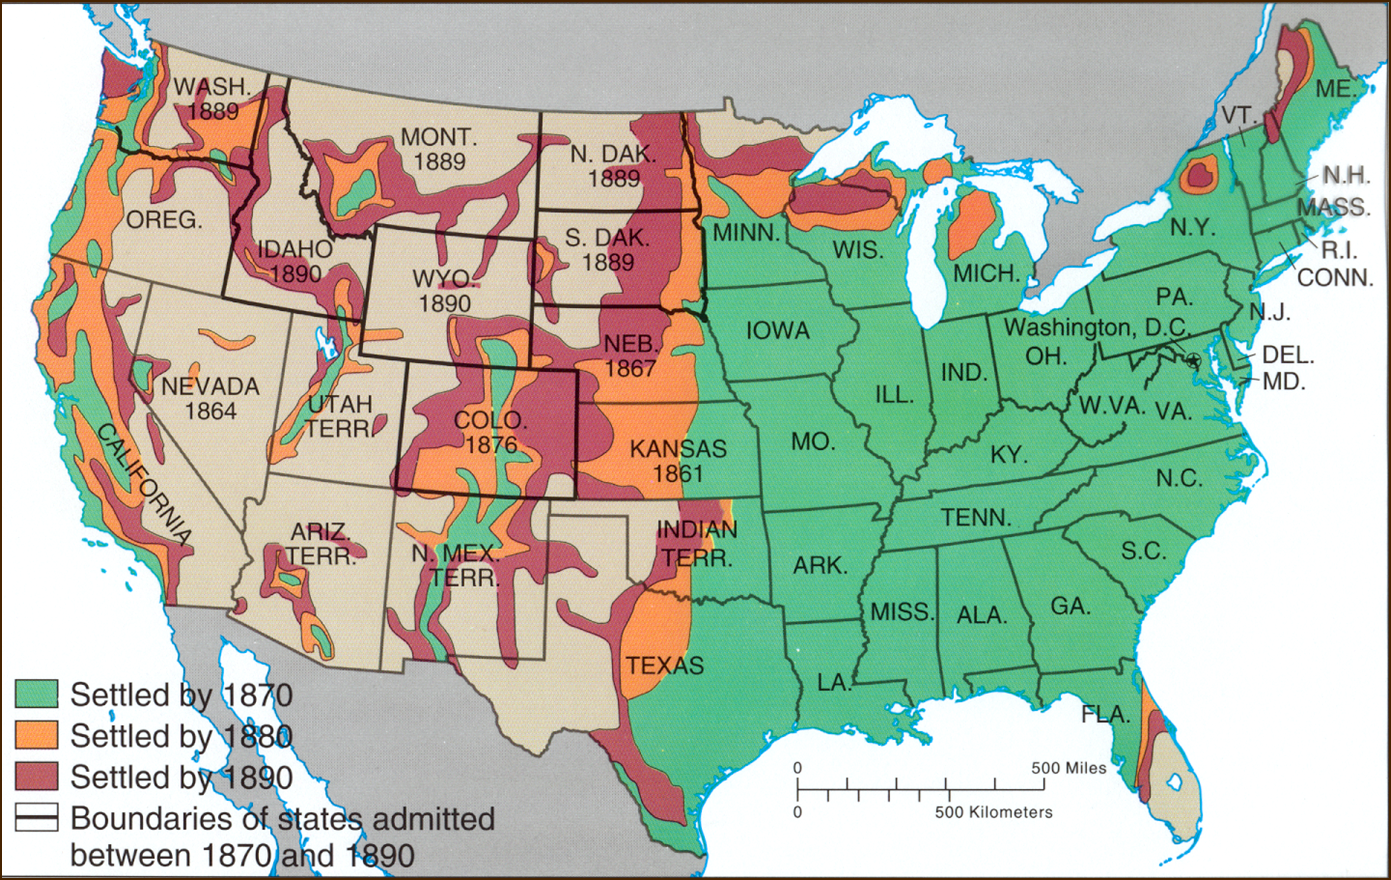 Power Point - The Dawes Act o